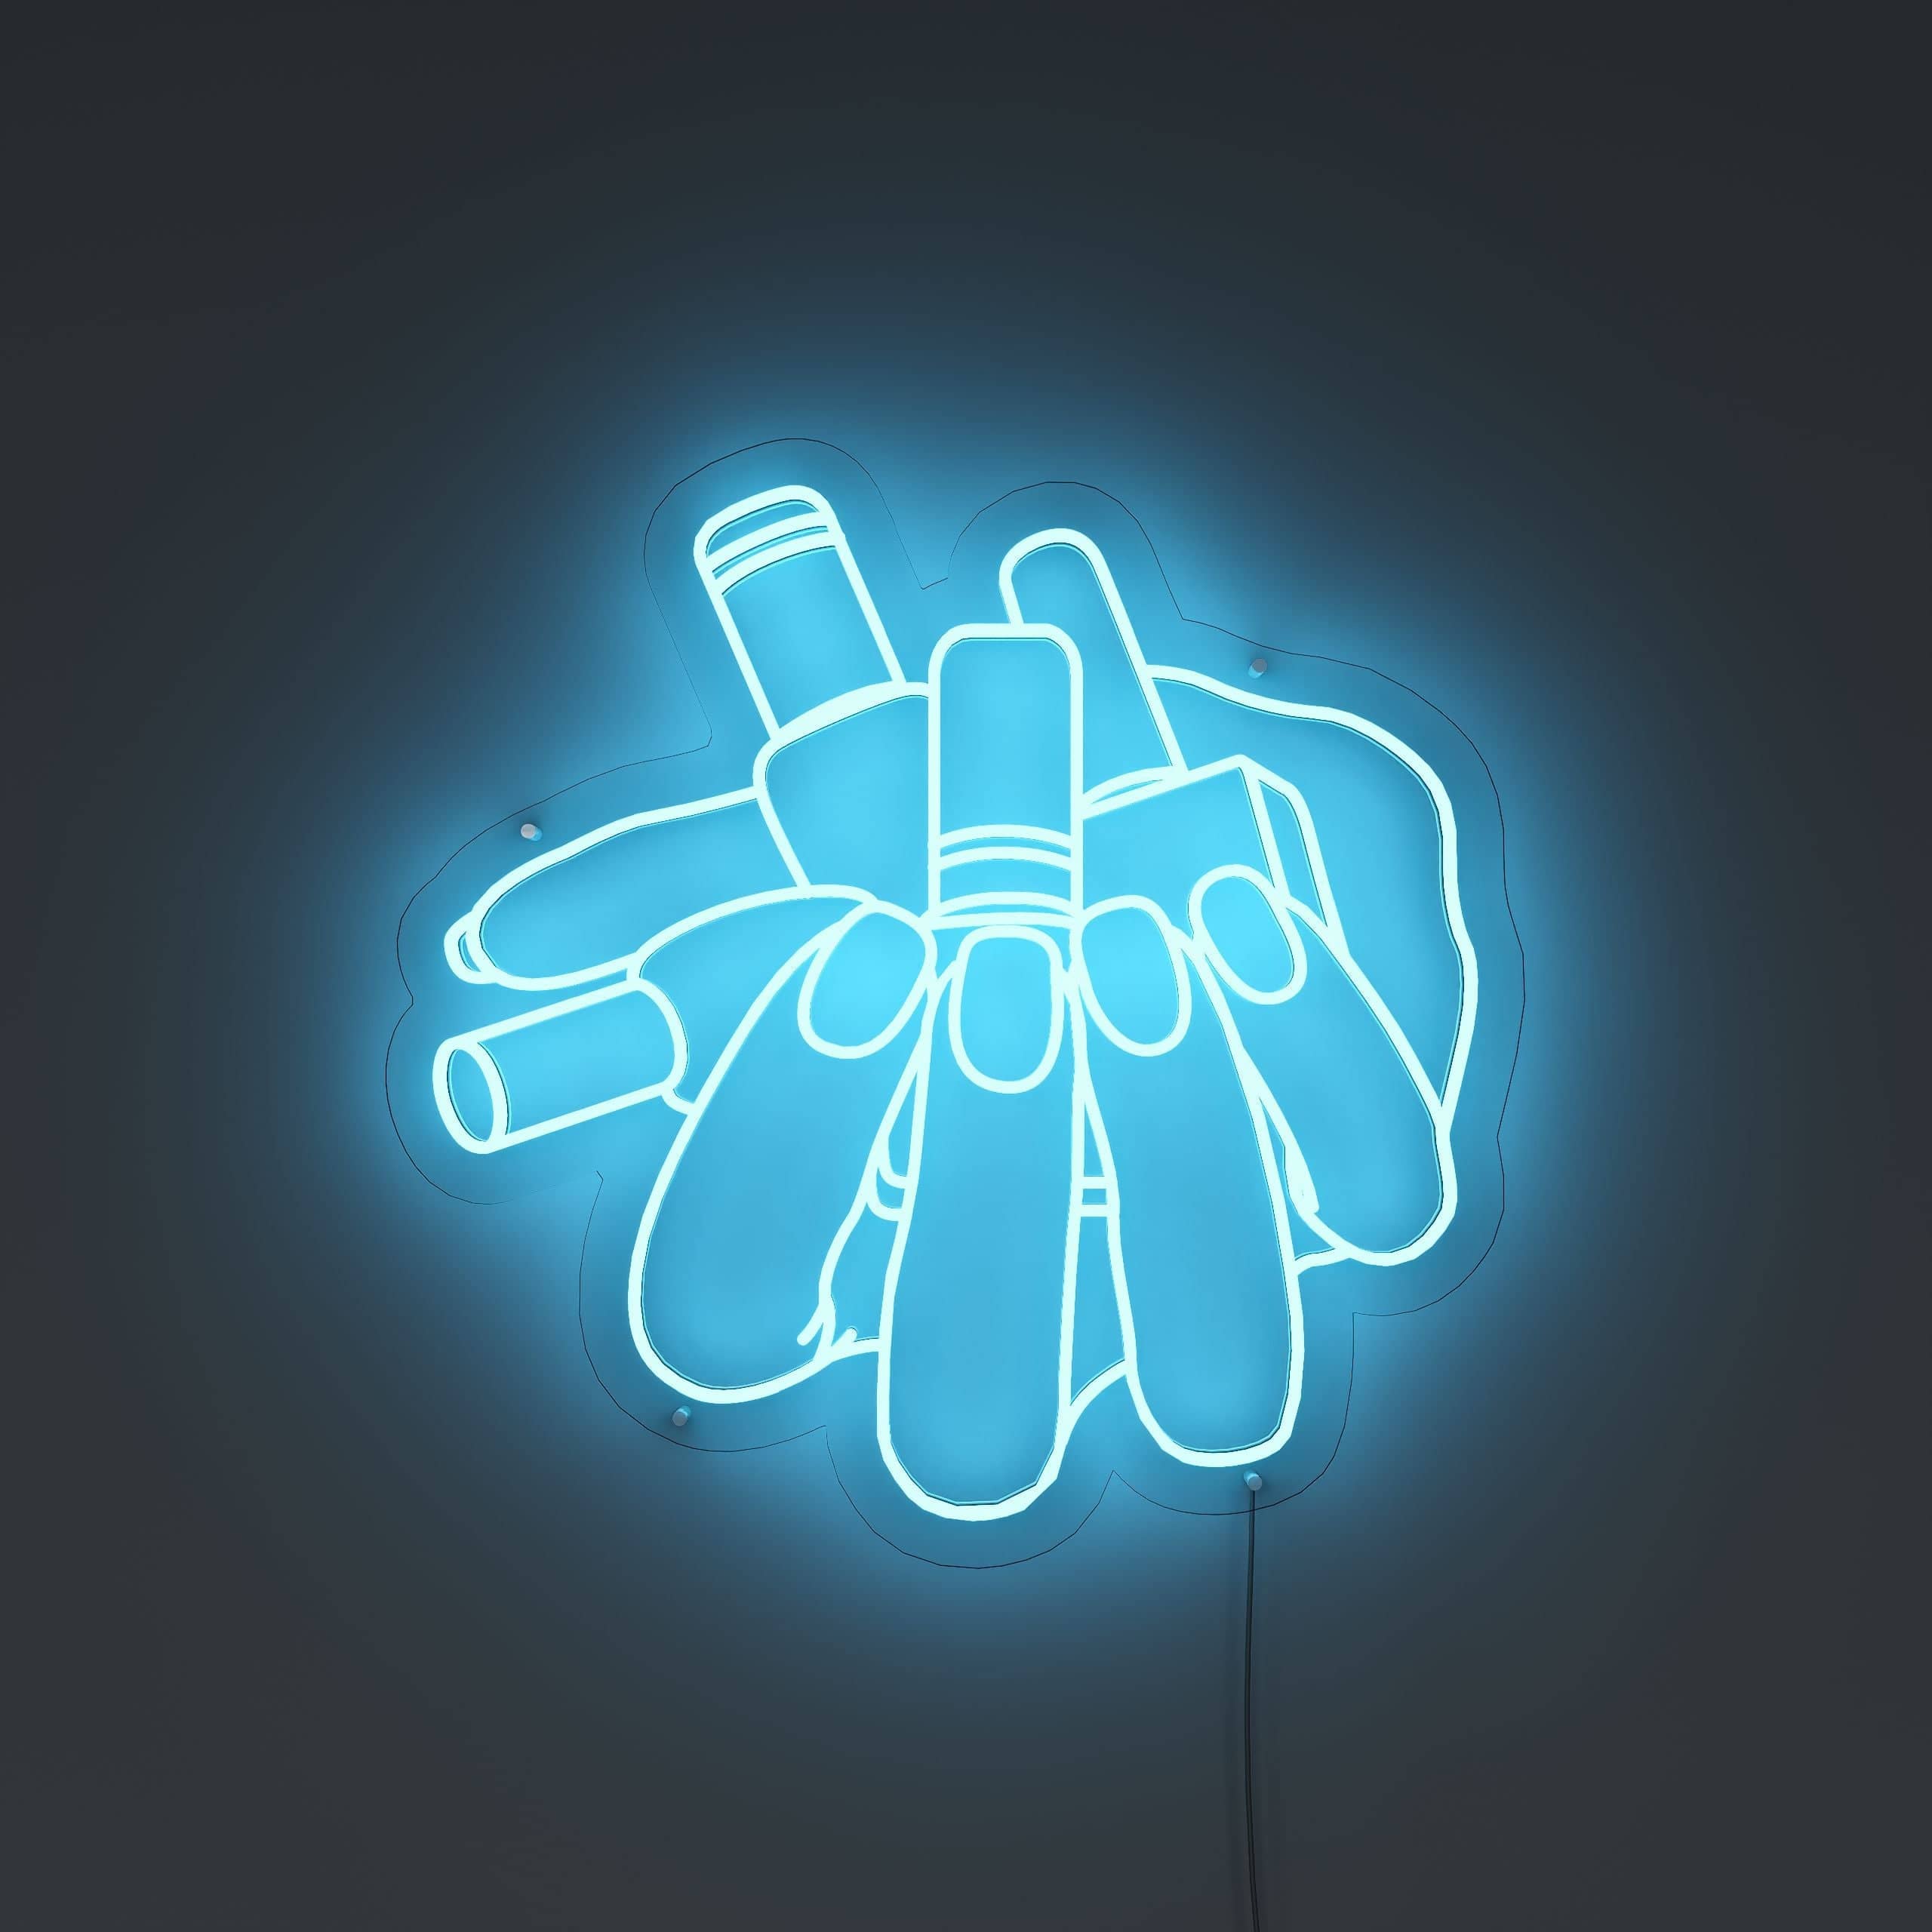 playful-candy-nail-patterns-neon-sign-lite